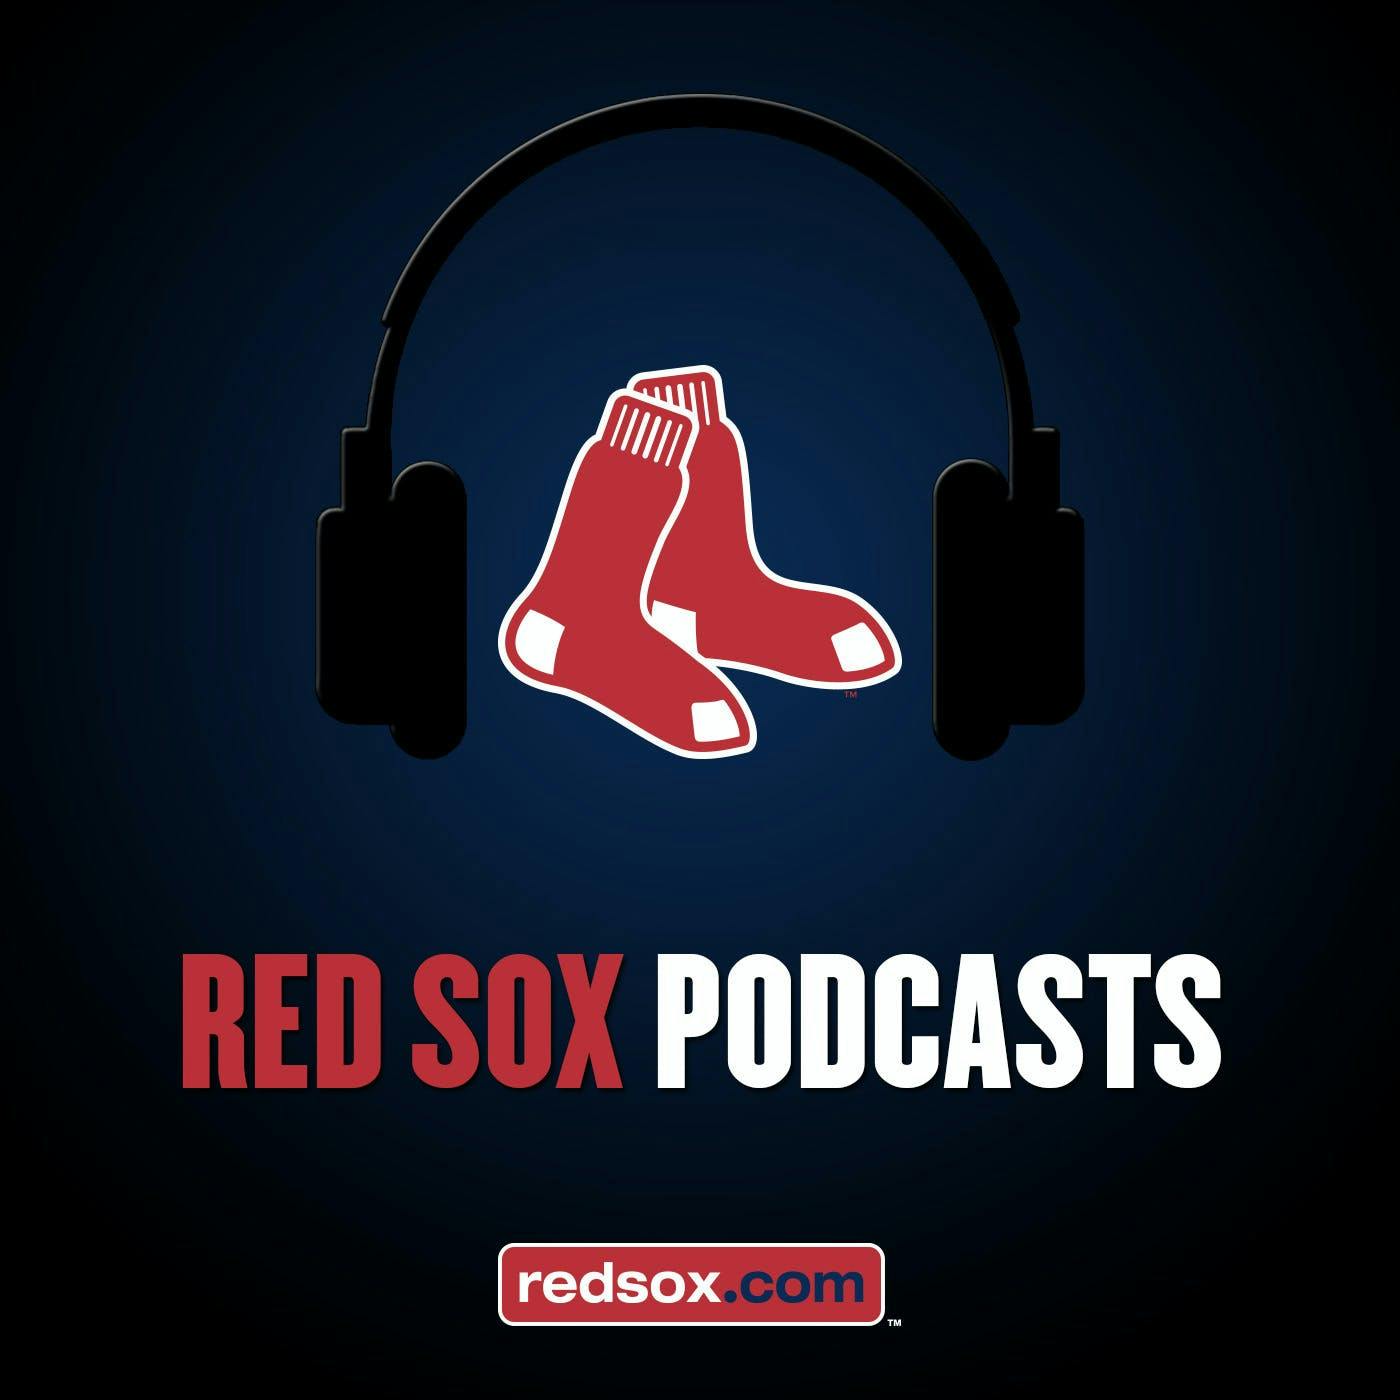 1/11/19: Red Sox Extras | Betts' deal, Sox outfield